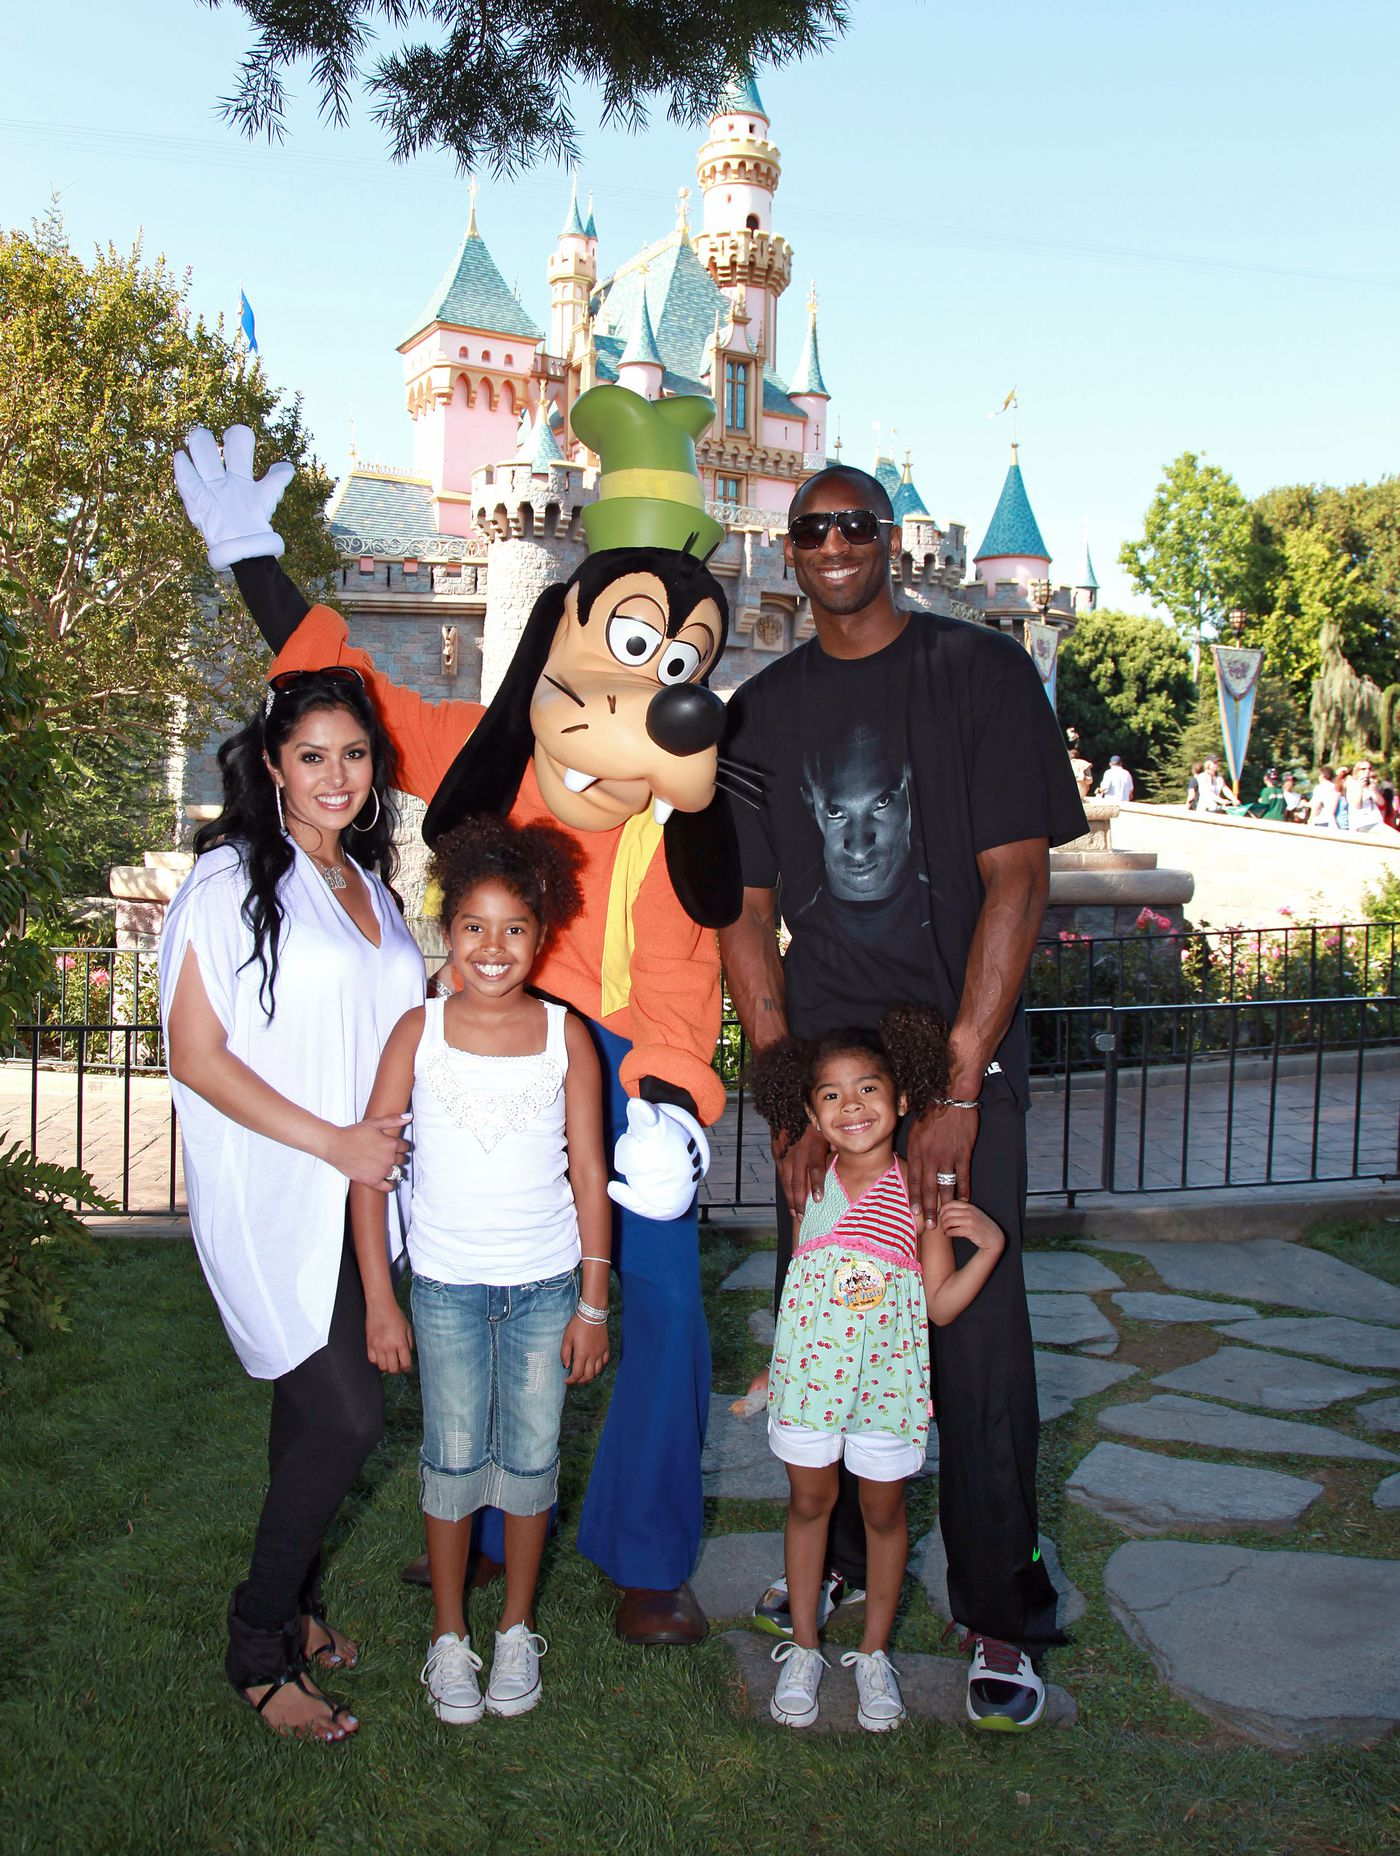 Kobe Bryant's magical family moment: Celebrating the Lakers' NBA championship victory at Disneyland with his wife Vanessa and daughters Natalia and Gianna in 2010